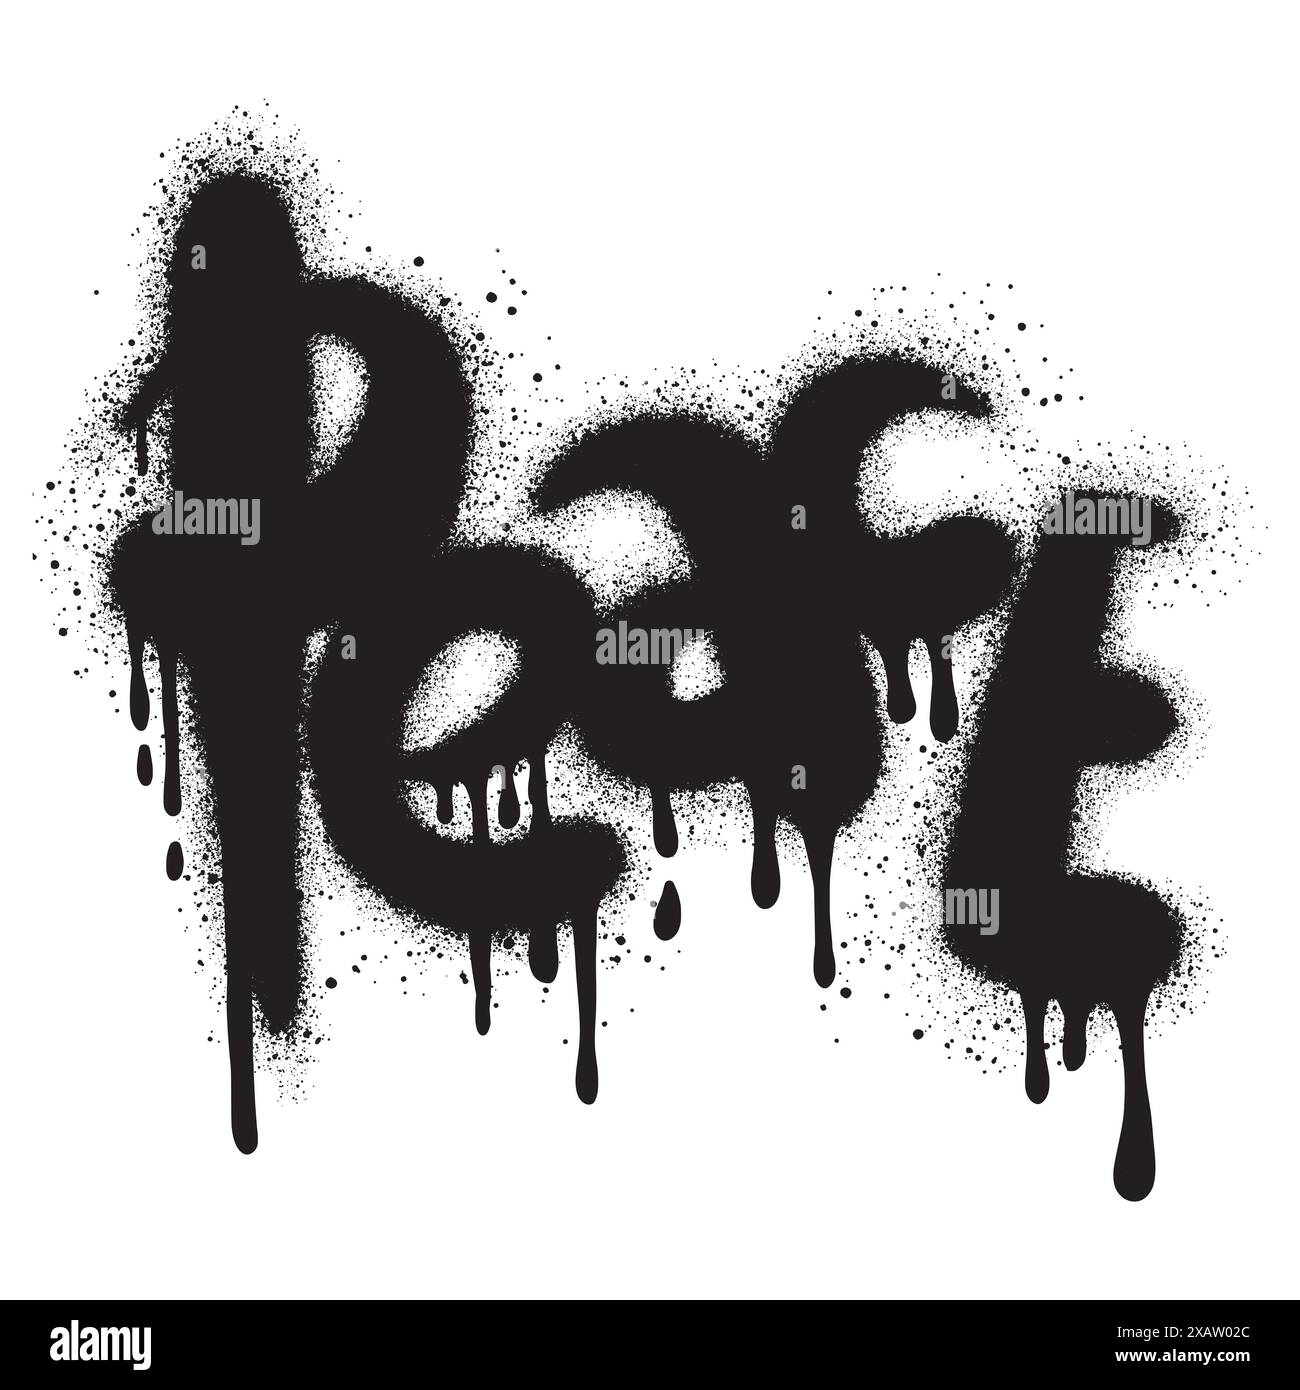 graffiti peace text sprayed in black over white. Stock Vector